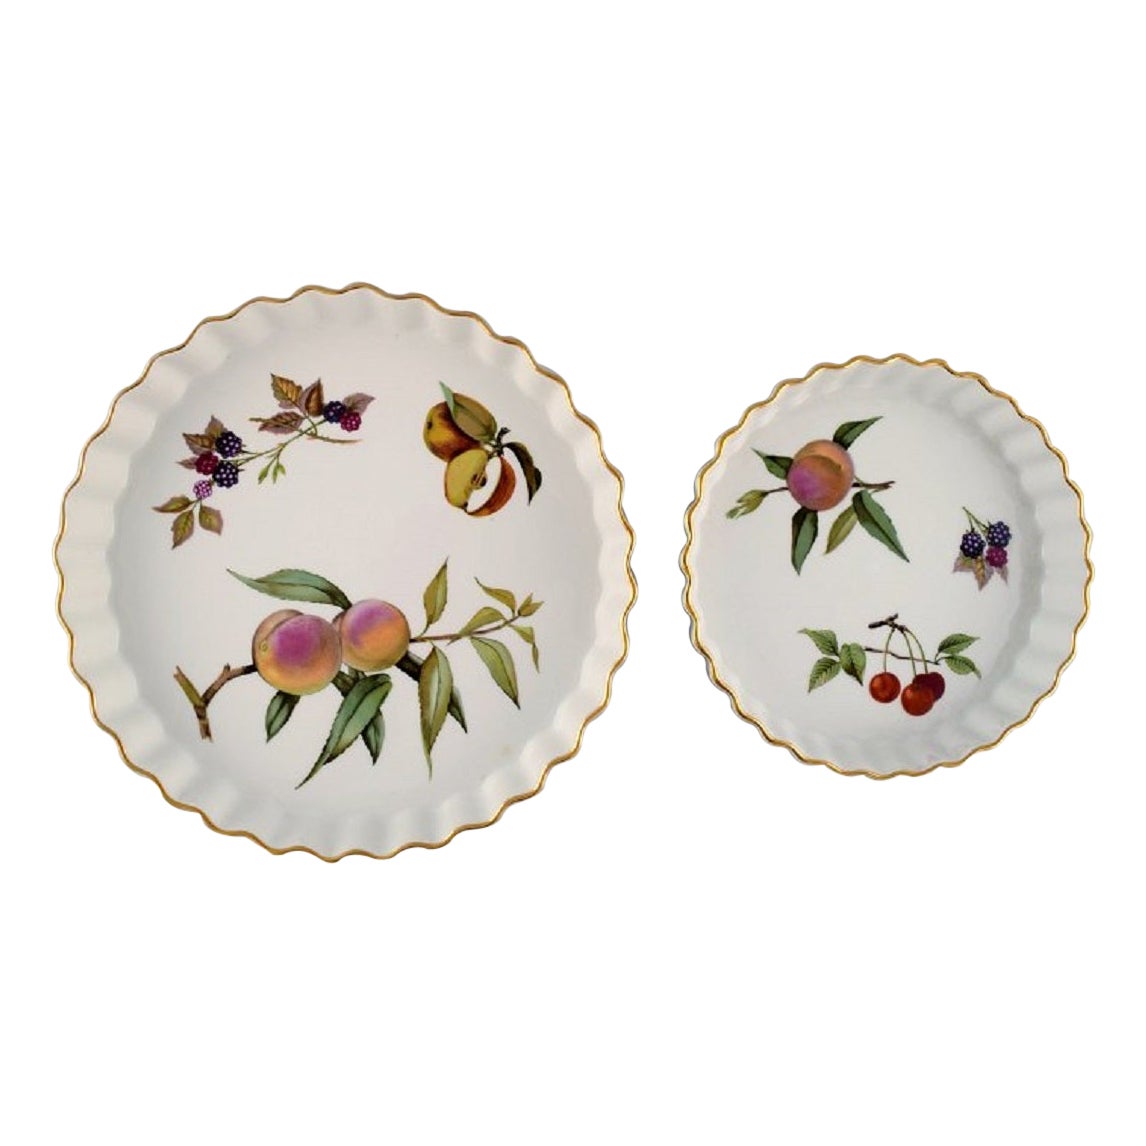 Royal Worcester, England. Two Evesham Pie Dishes in Porcelain, 1980s